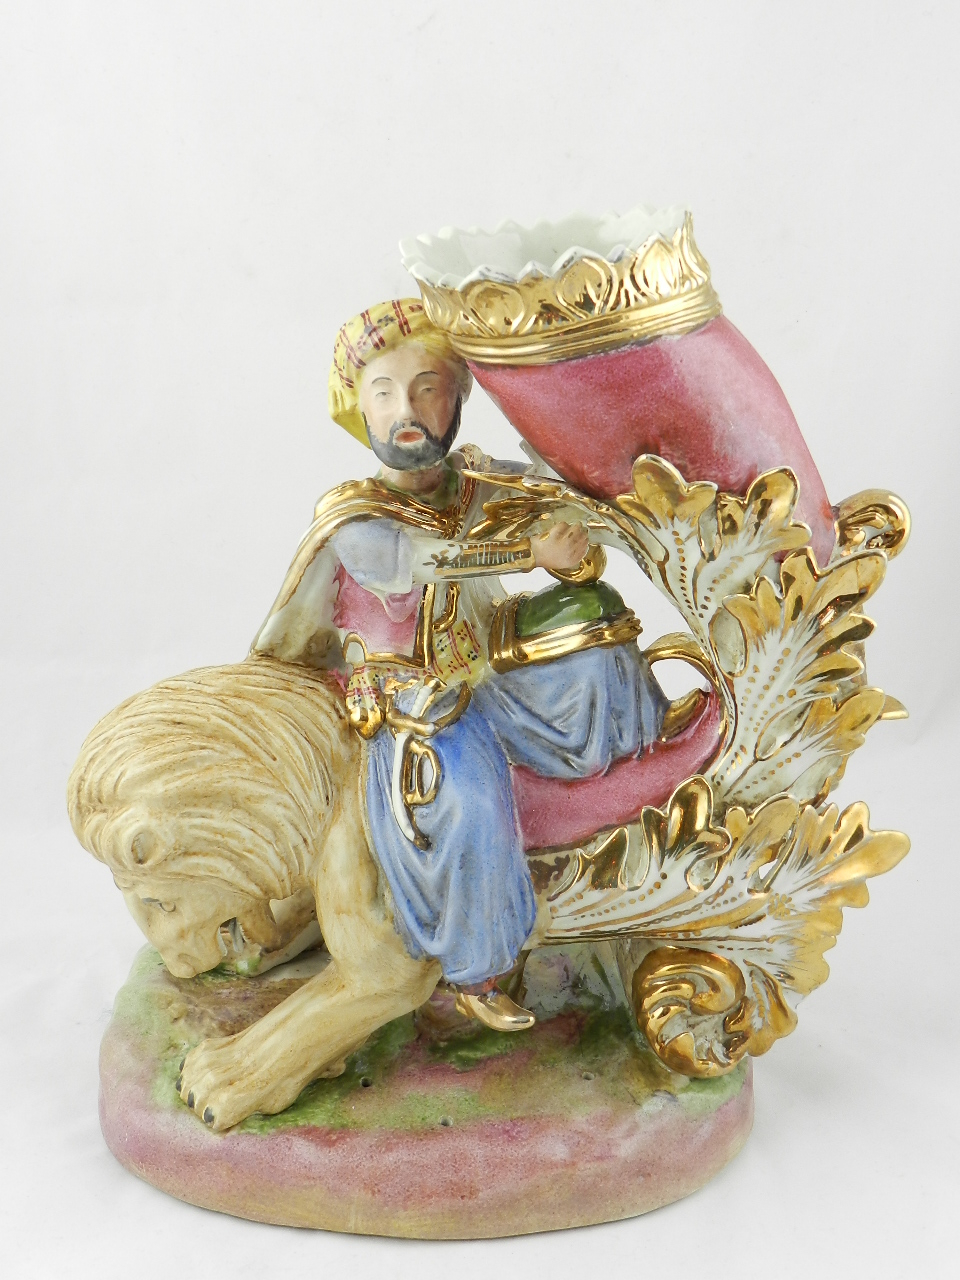 A French group of a sultan riding a lion with vase form cornucopia all on an oval base.